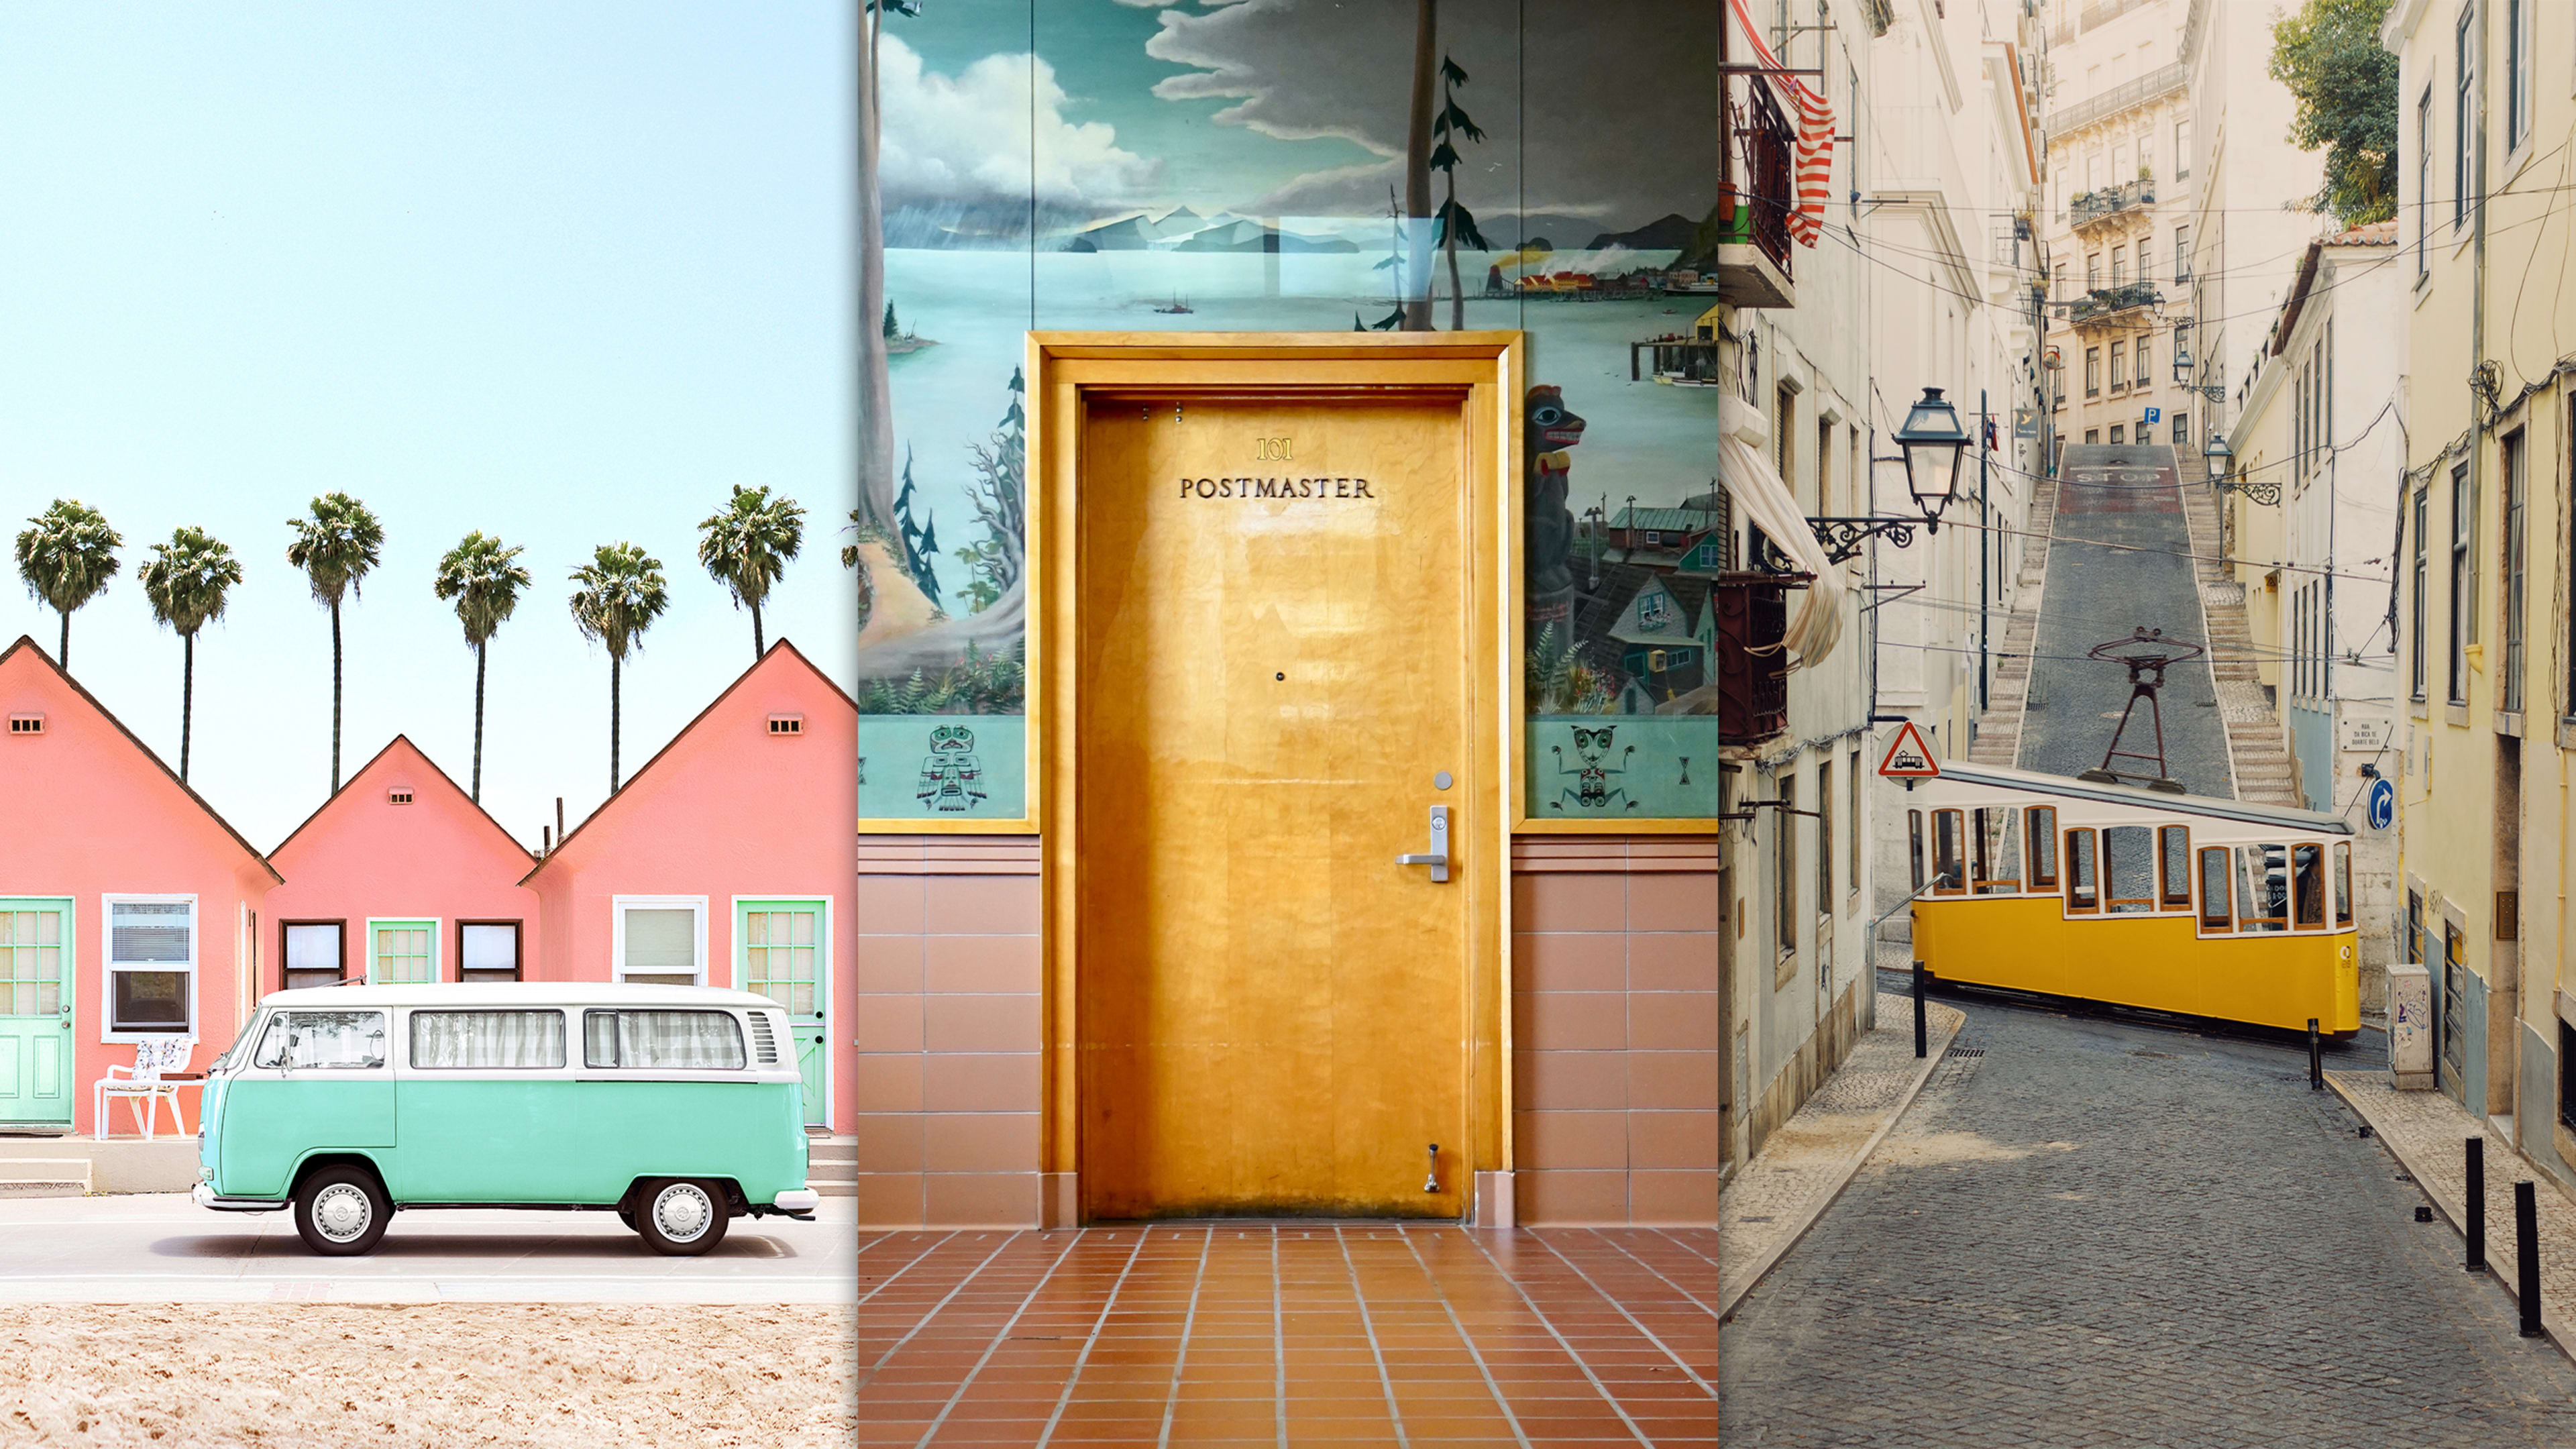 See what Wes Anderson sets would look like in real life